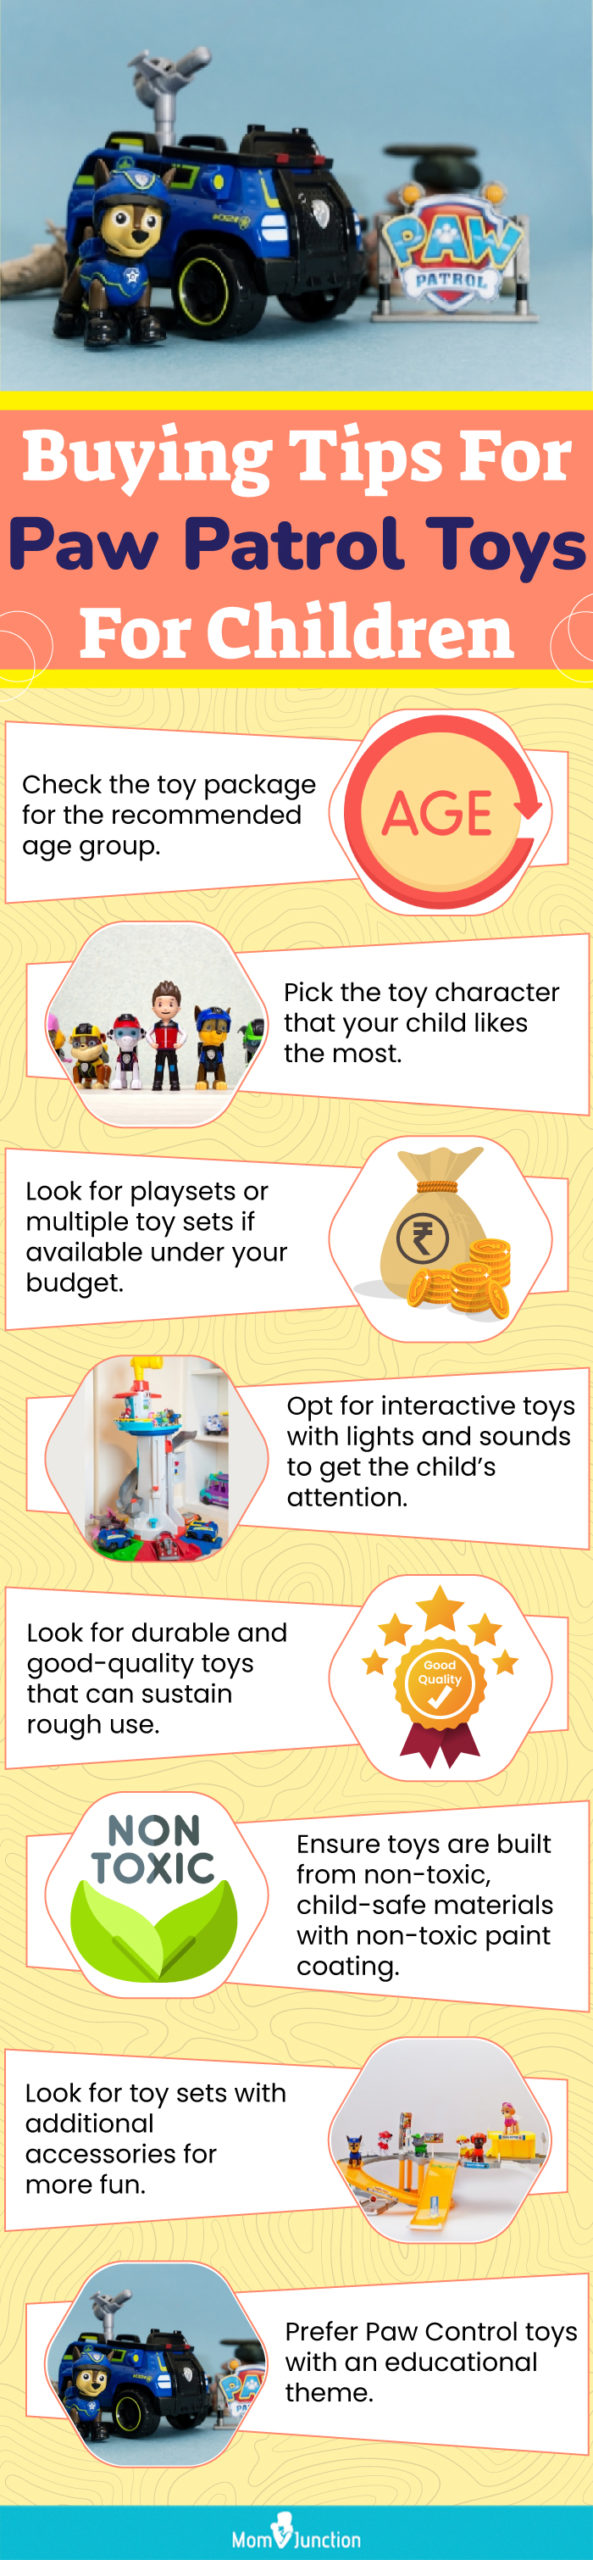 Buying Tips For Paw Patrol Toys For Children (infographic)